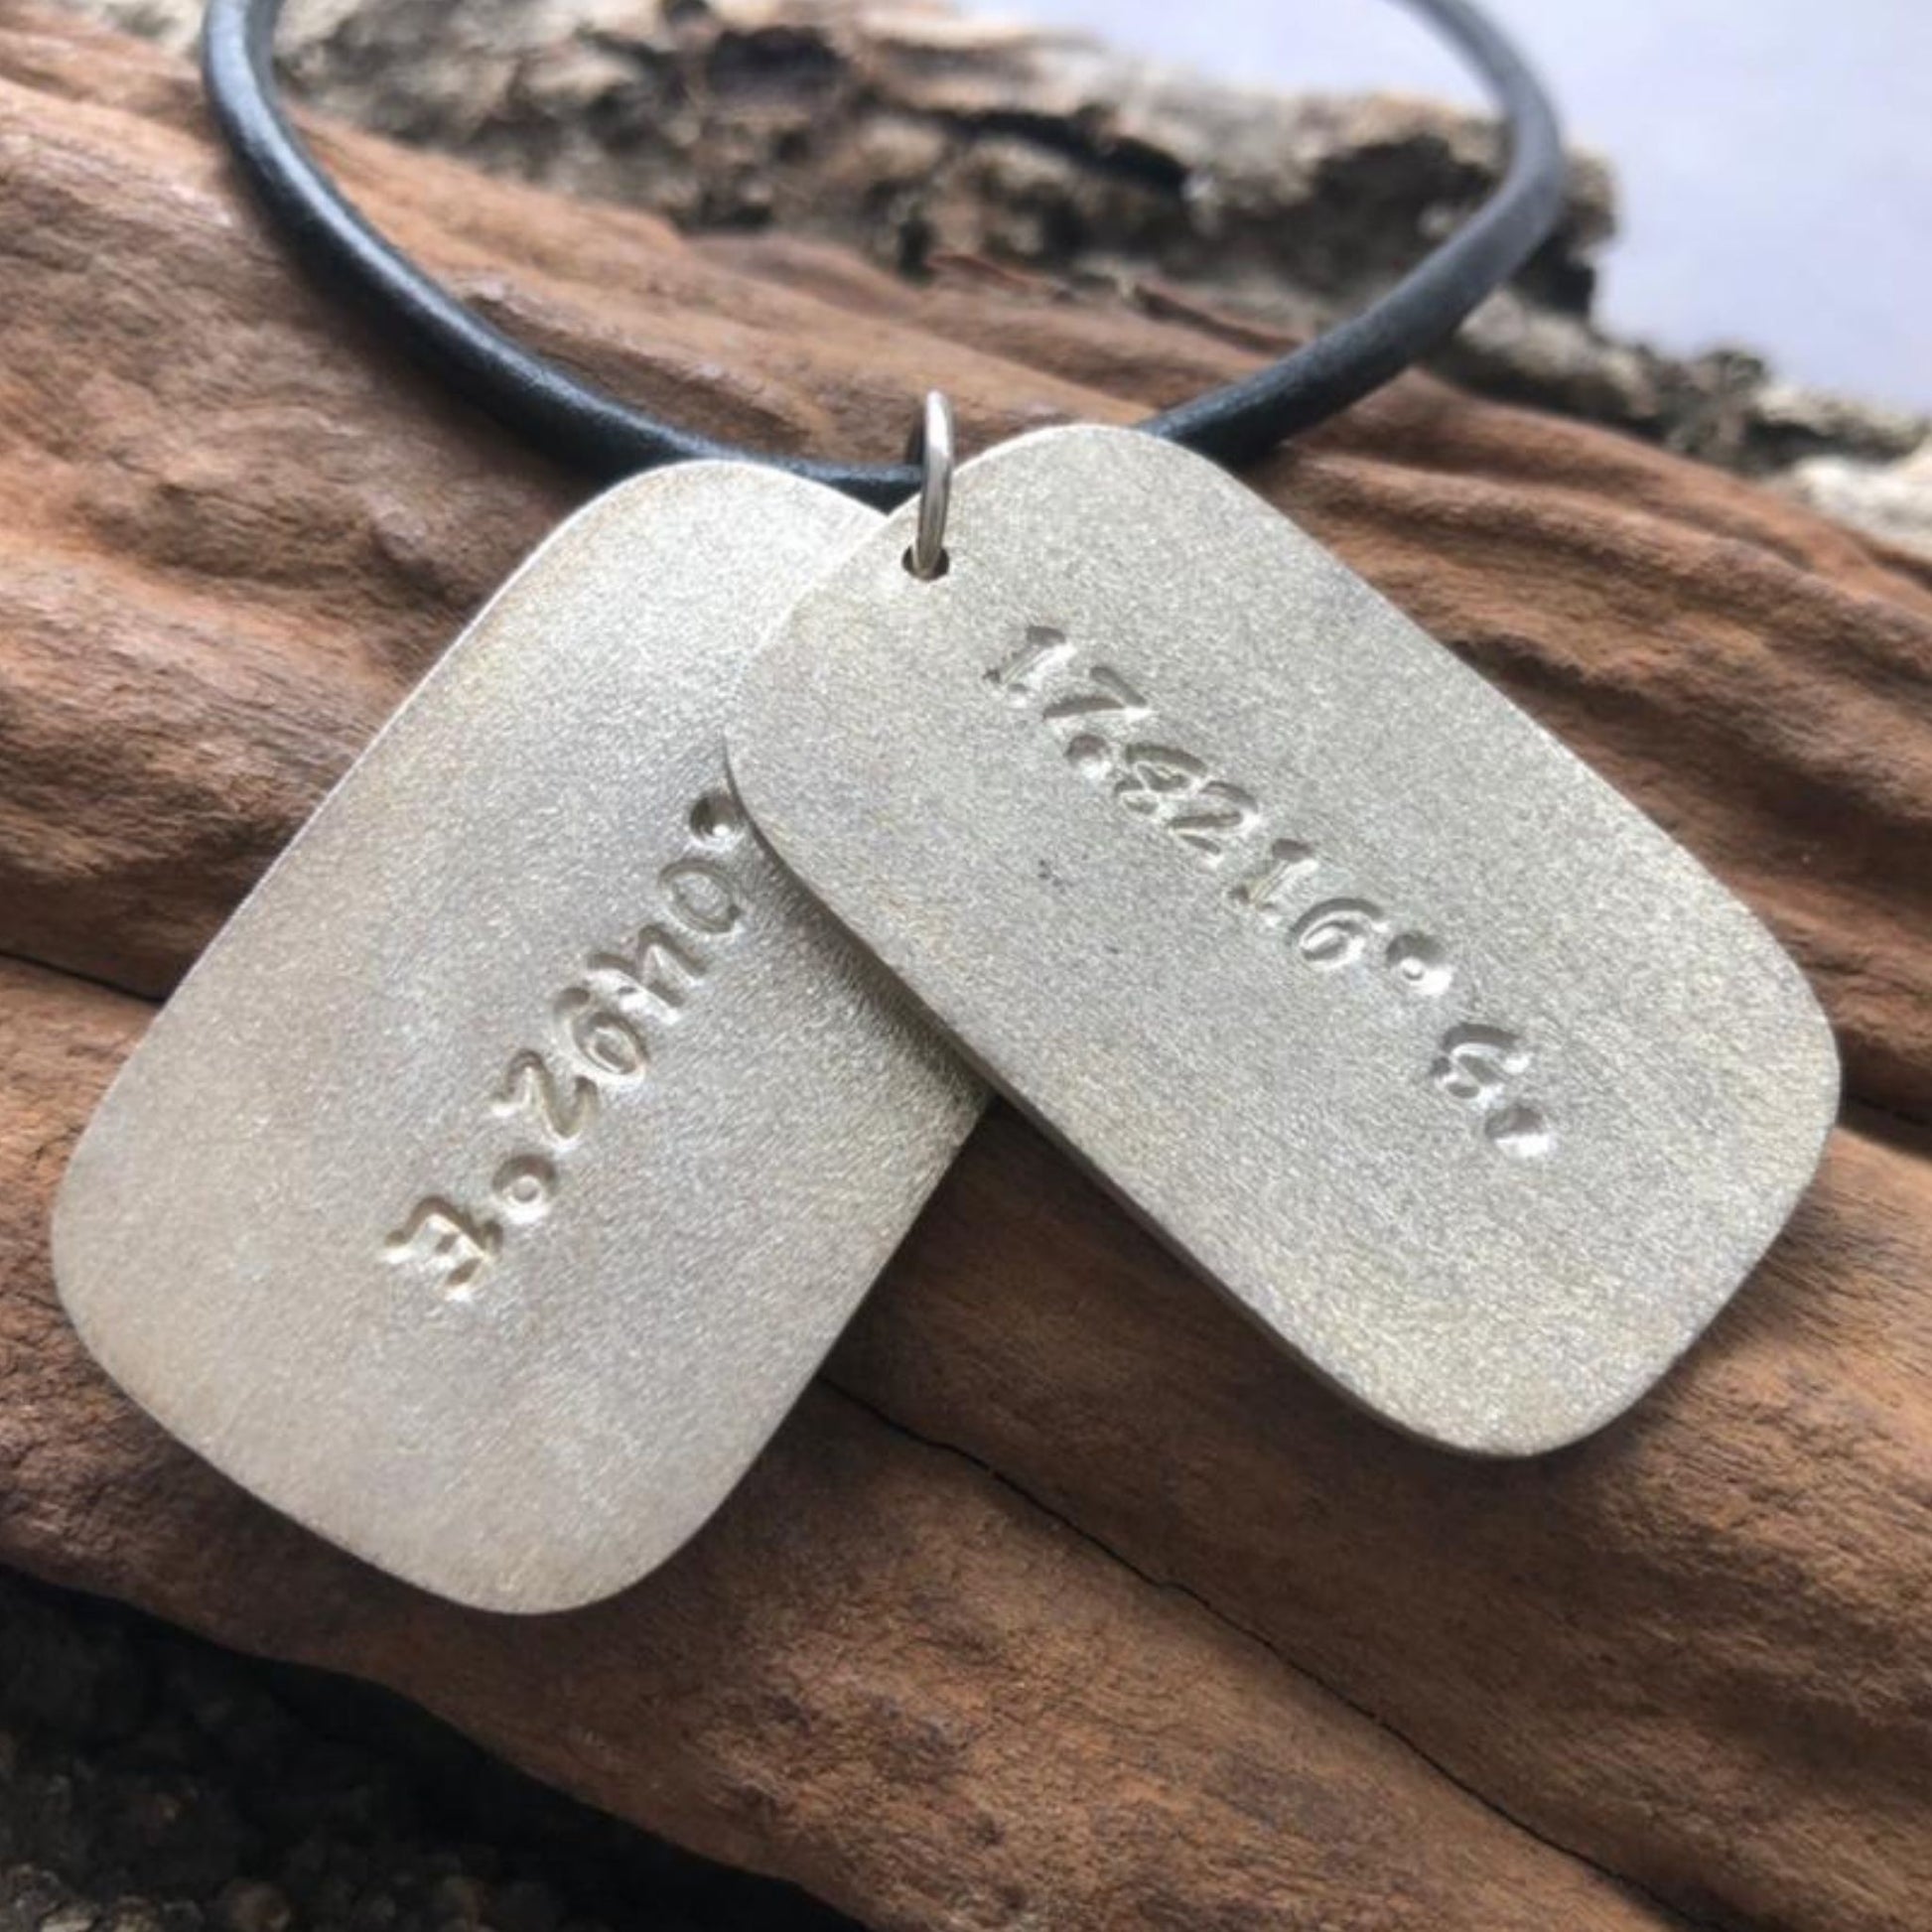 GPS Dog Tags on Leather Belts Made in Bulawayo 